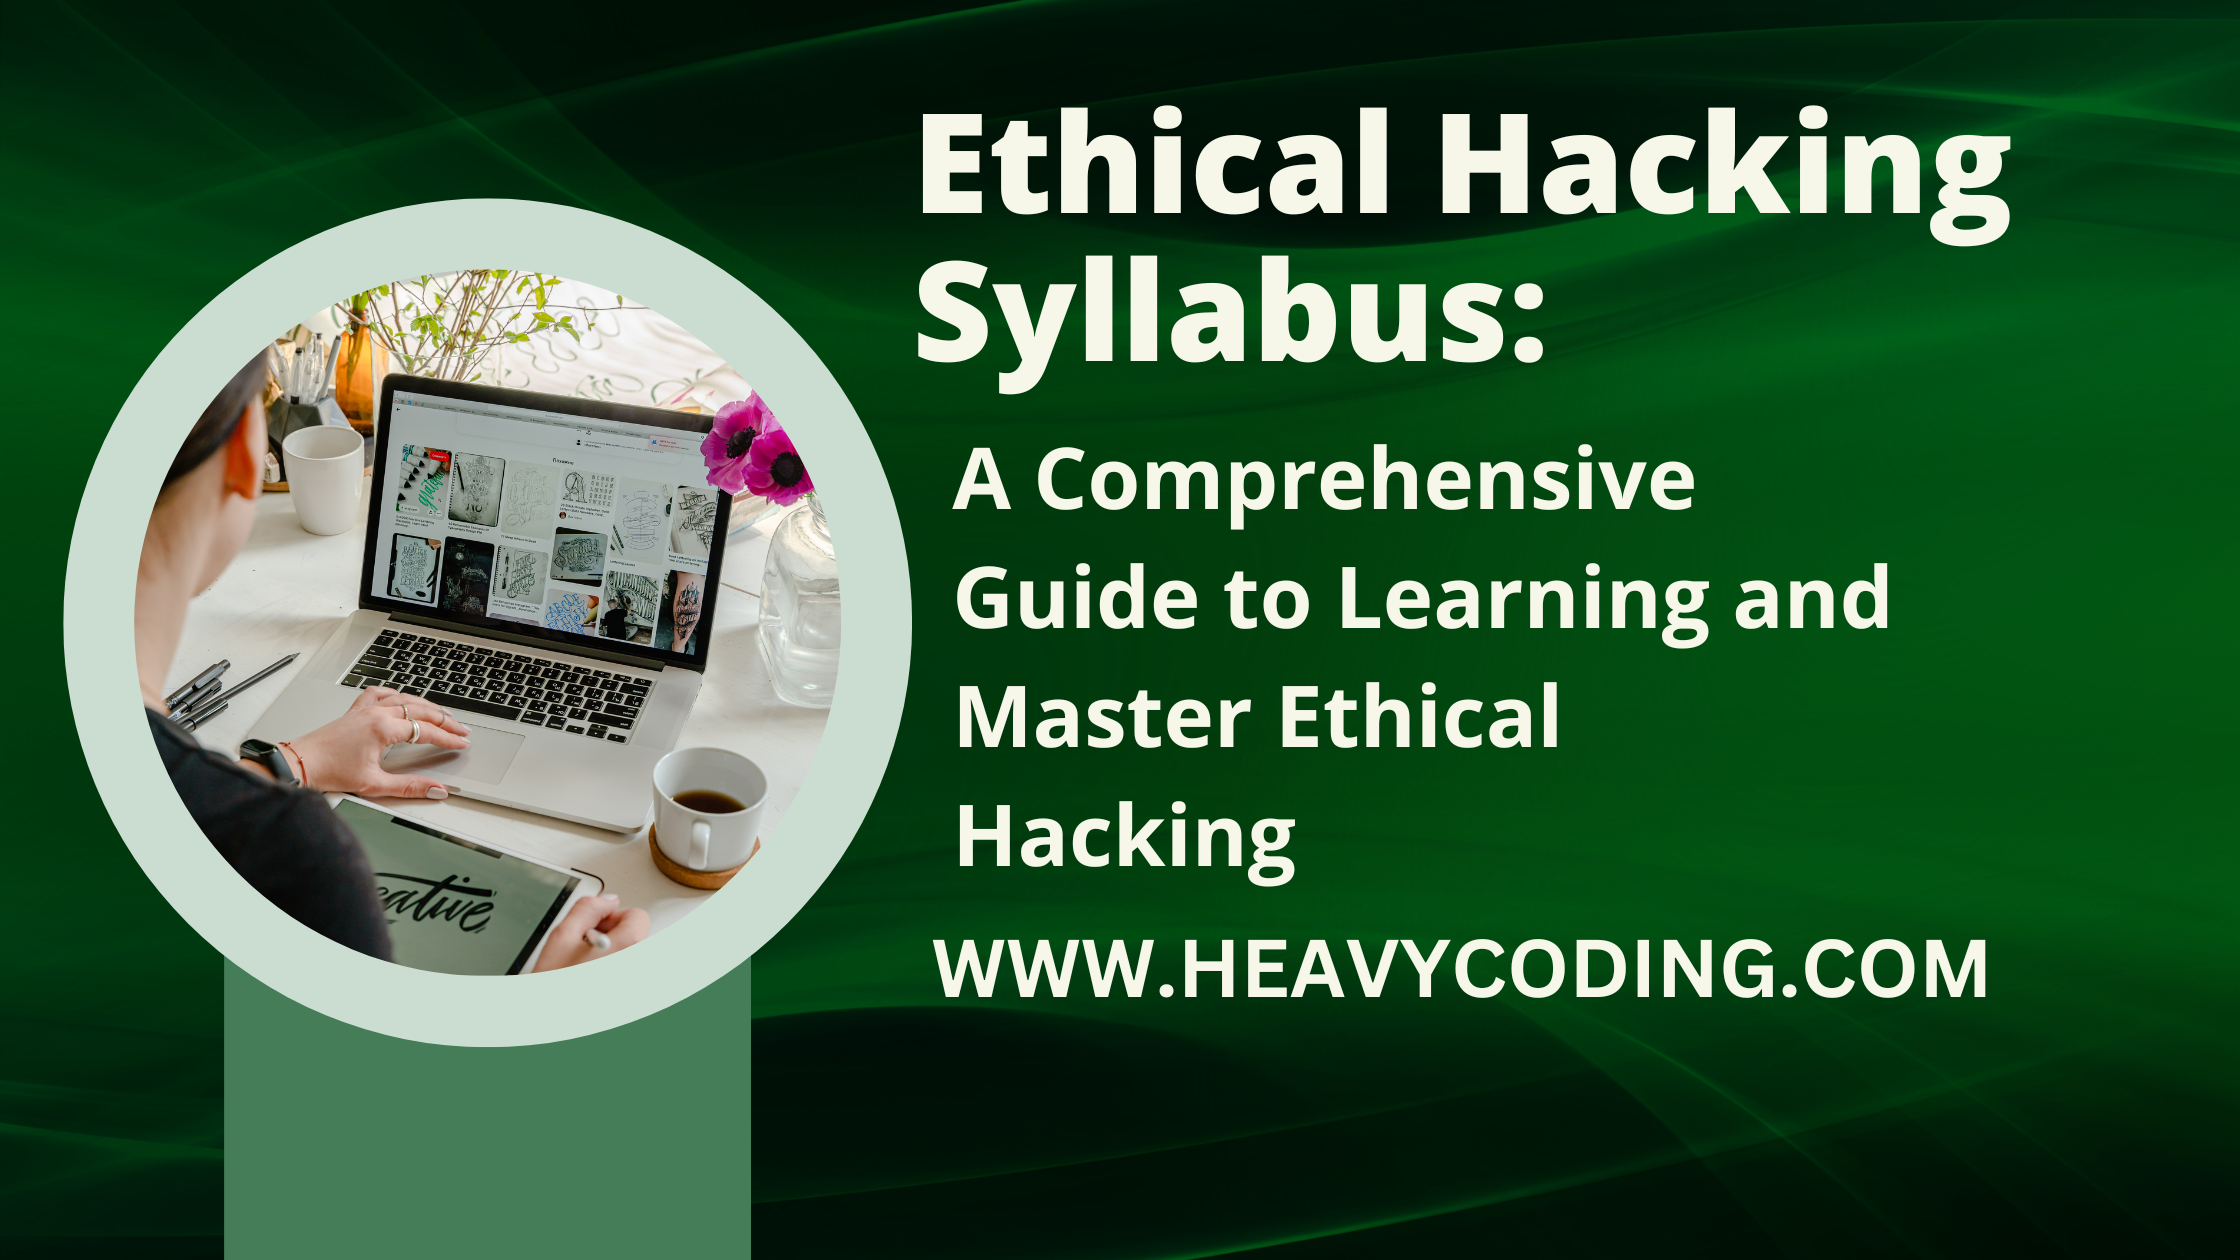 You are currently viewing Ethical Hacking Syllabus: A Comprehensive Guide to Learning and Master Ethical Hacking